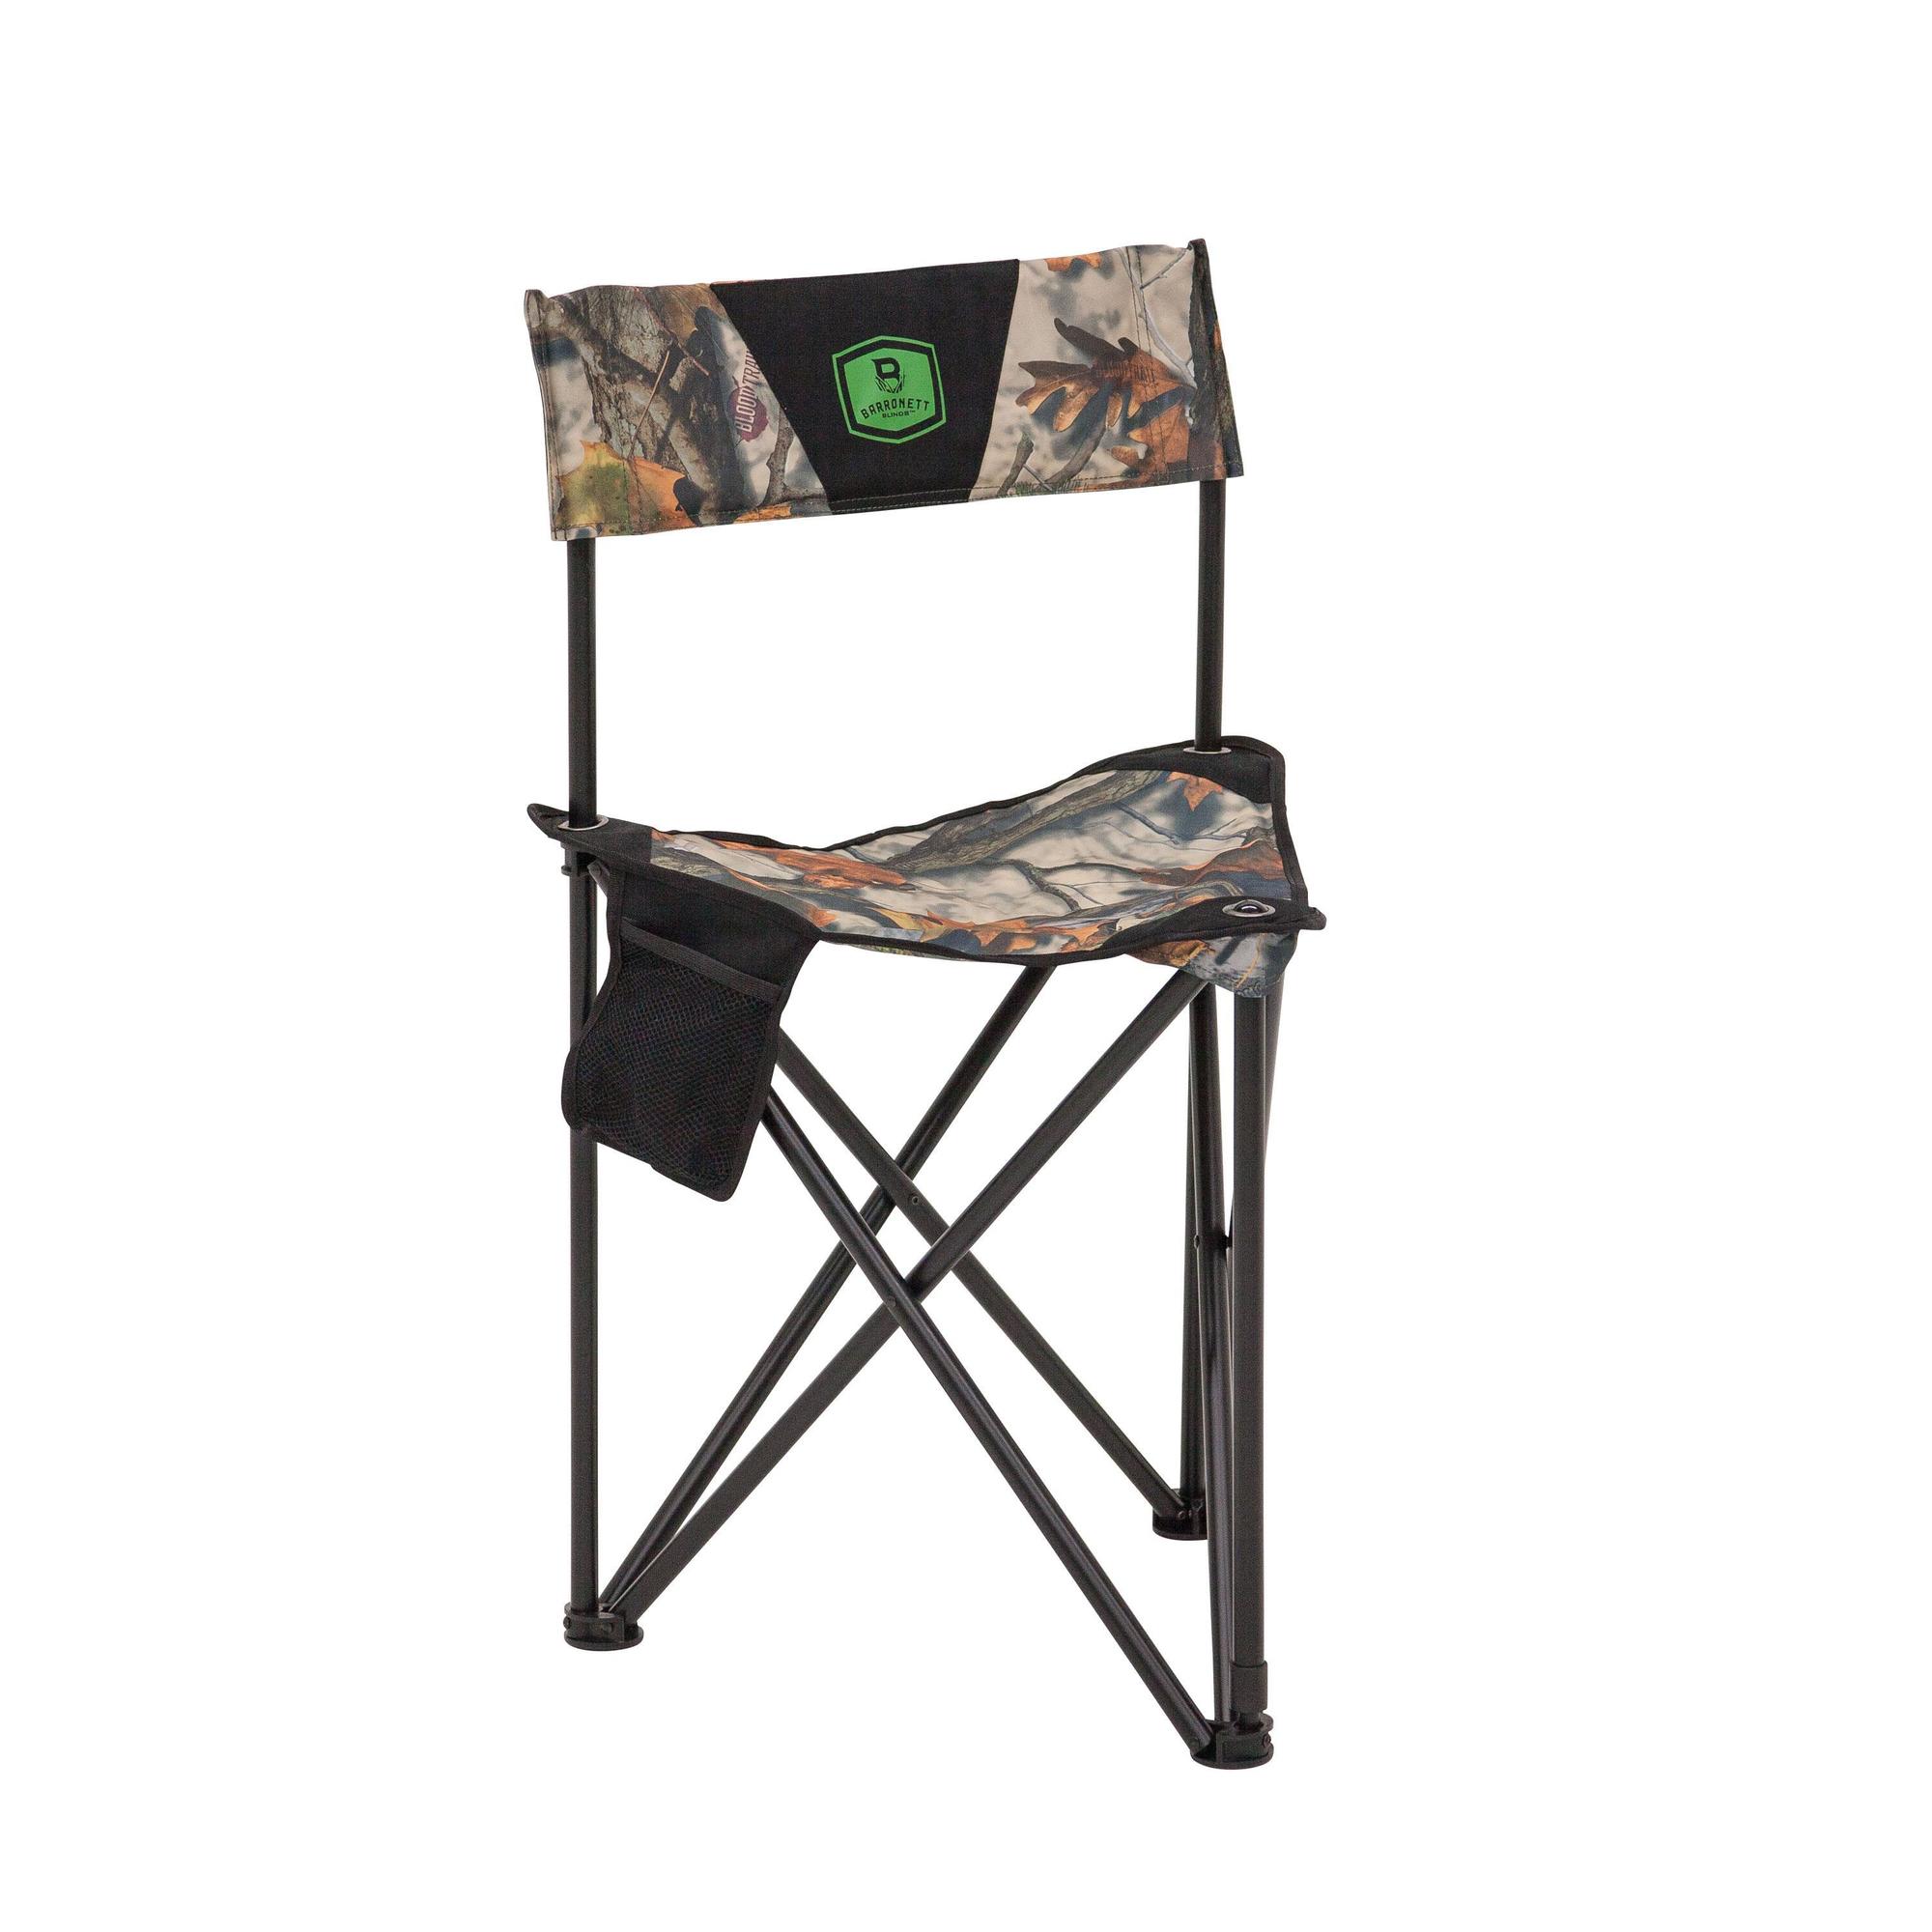 Barronett Blinds, XL Tripod Chair, Portable, 300 lb. Capacity, Color Camouflage, Material Polyester, Model BC101